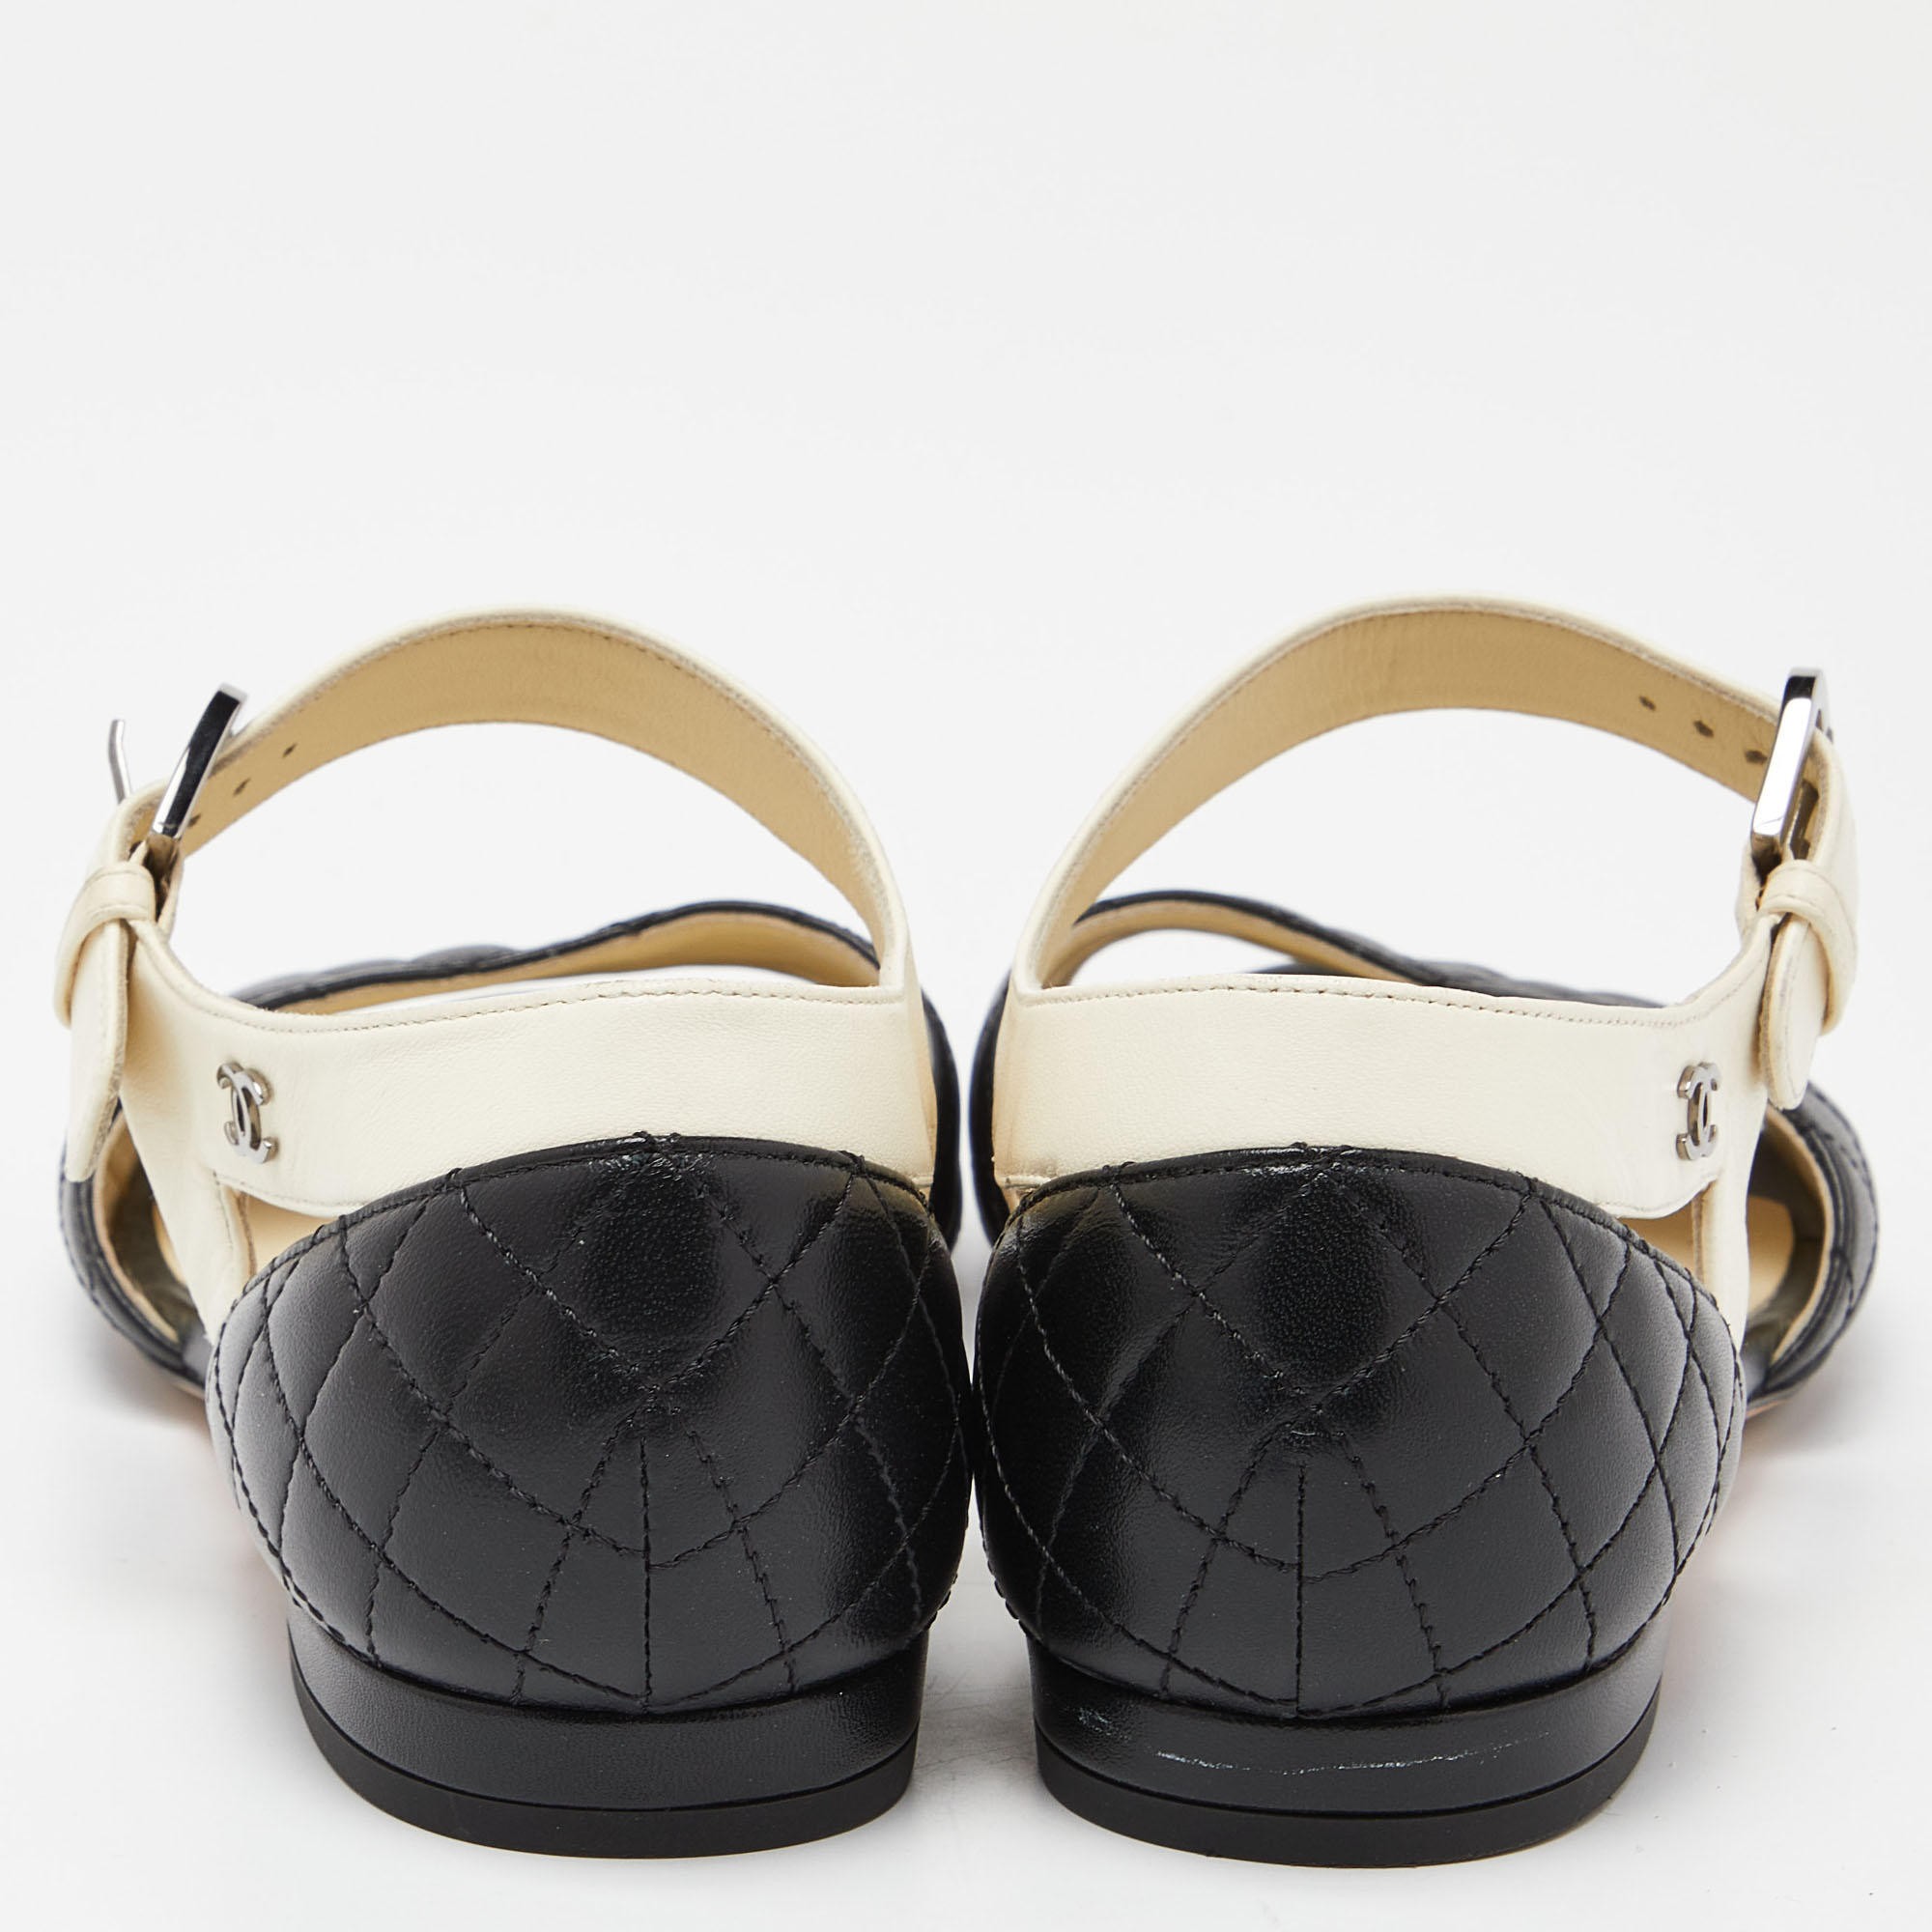 Chanel Black/Cream Quilted Leather Flat Sandals Size 35.5